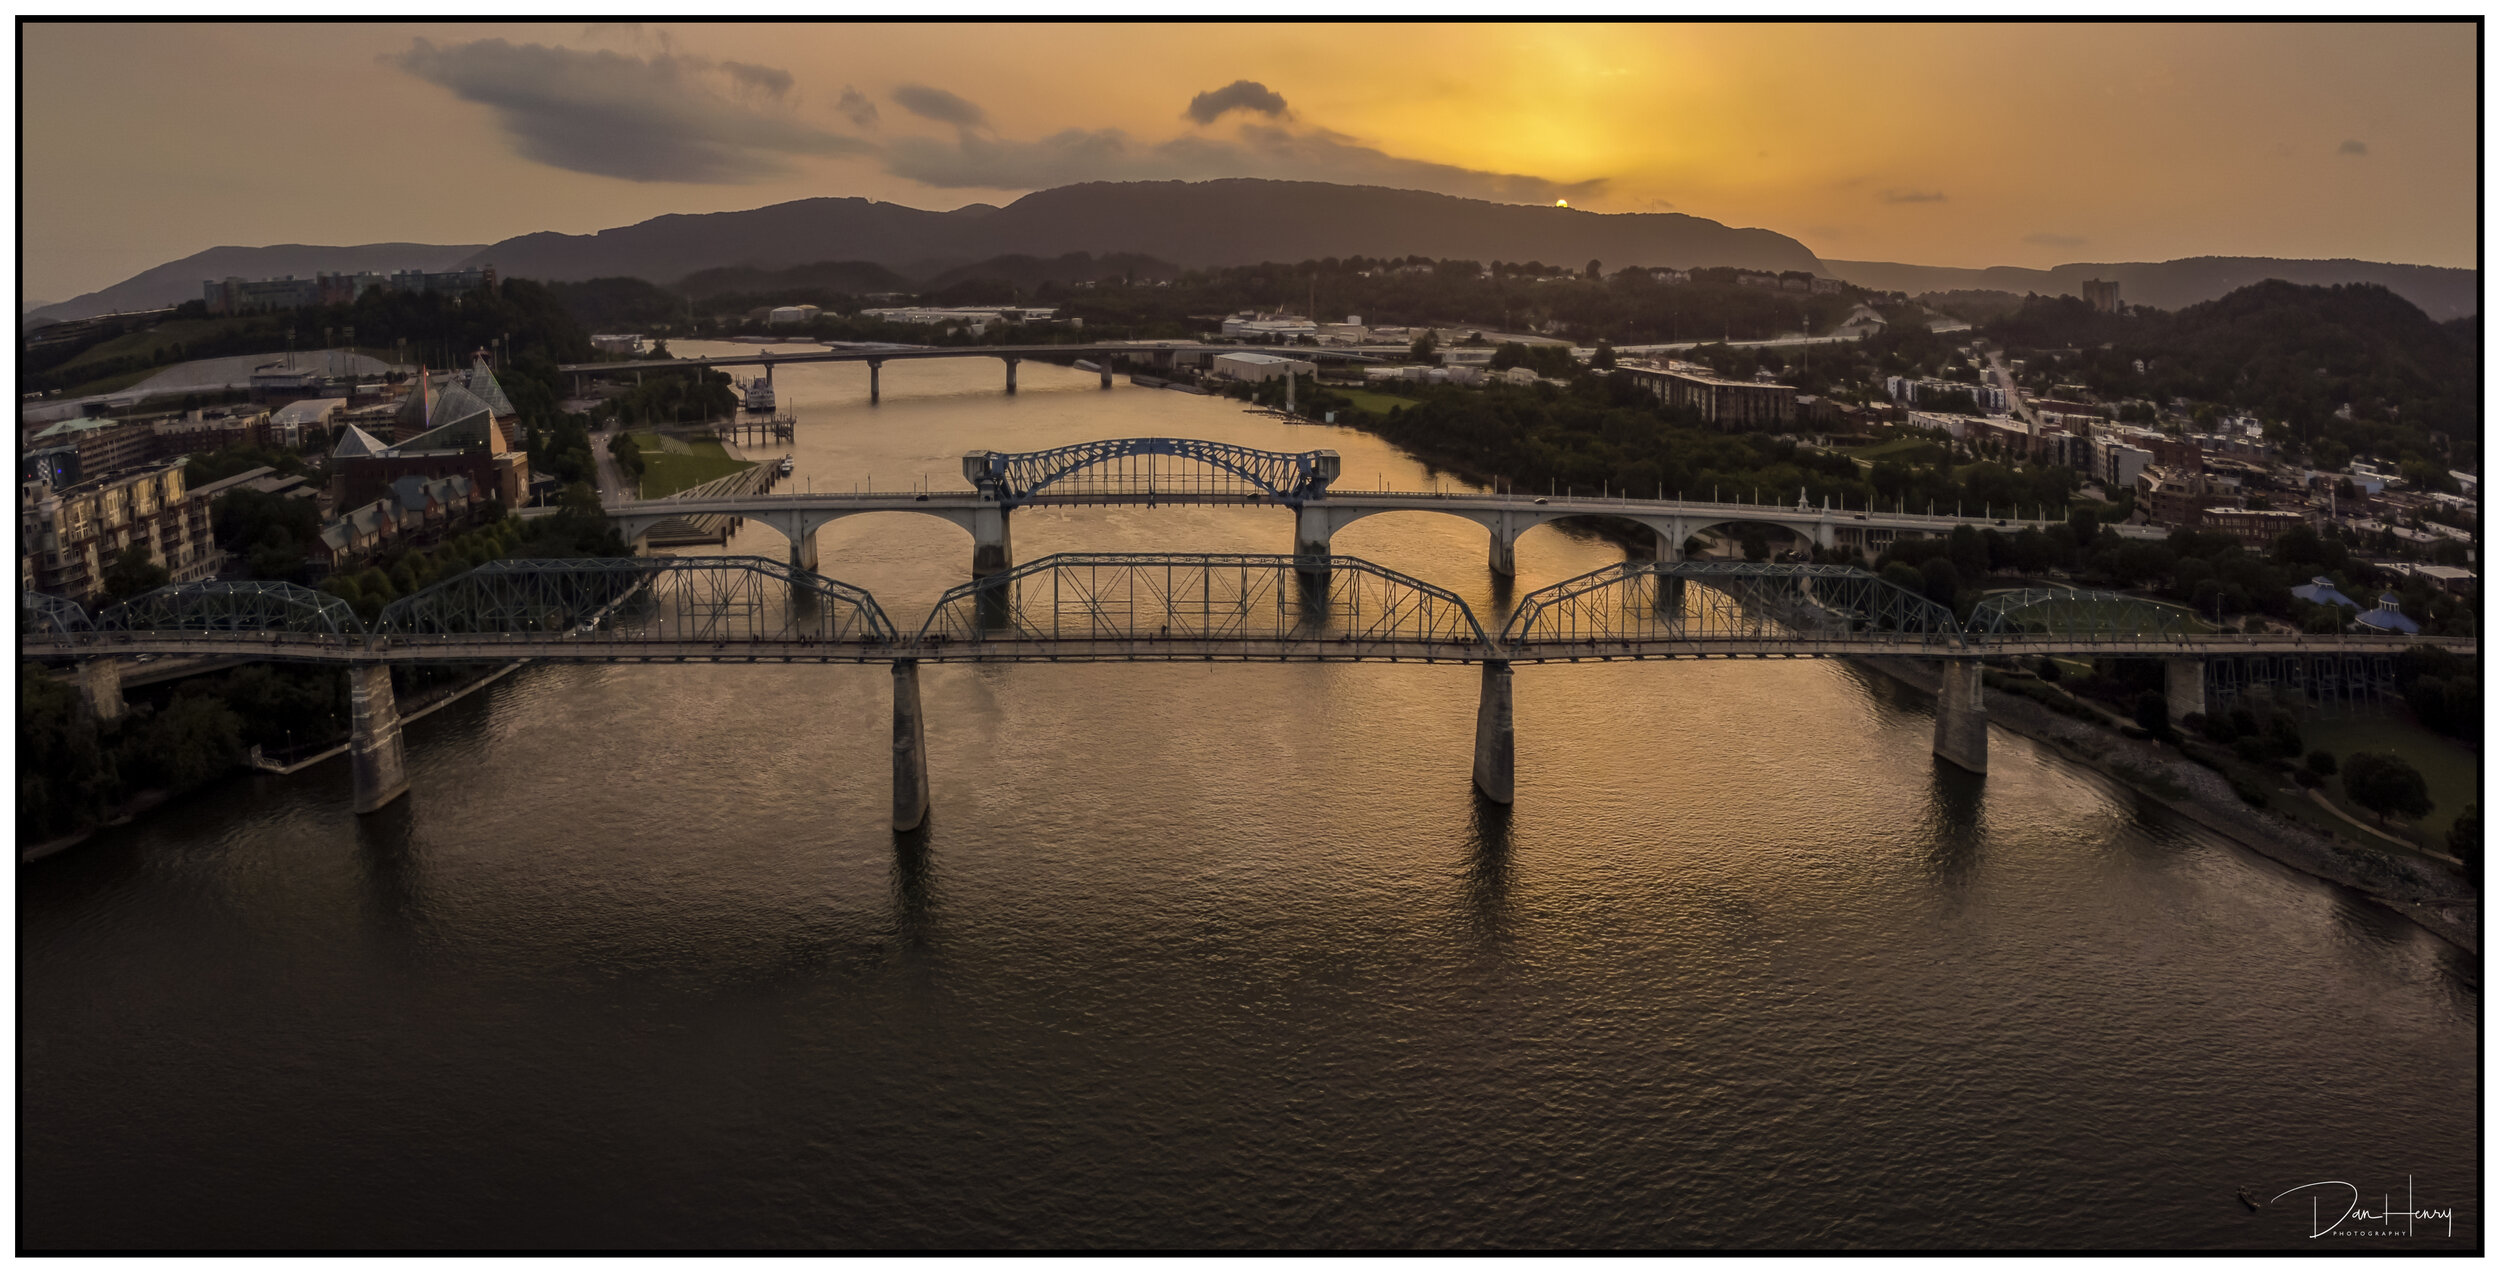  | Downtown Chattanooga Saharan-Dust Sunset Panoramic |  This print is available in 10"x20"  